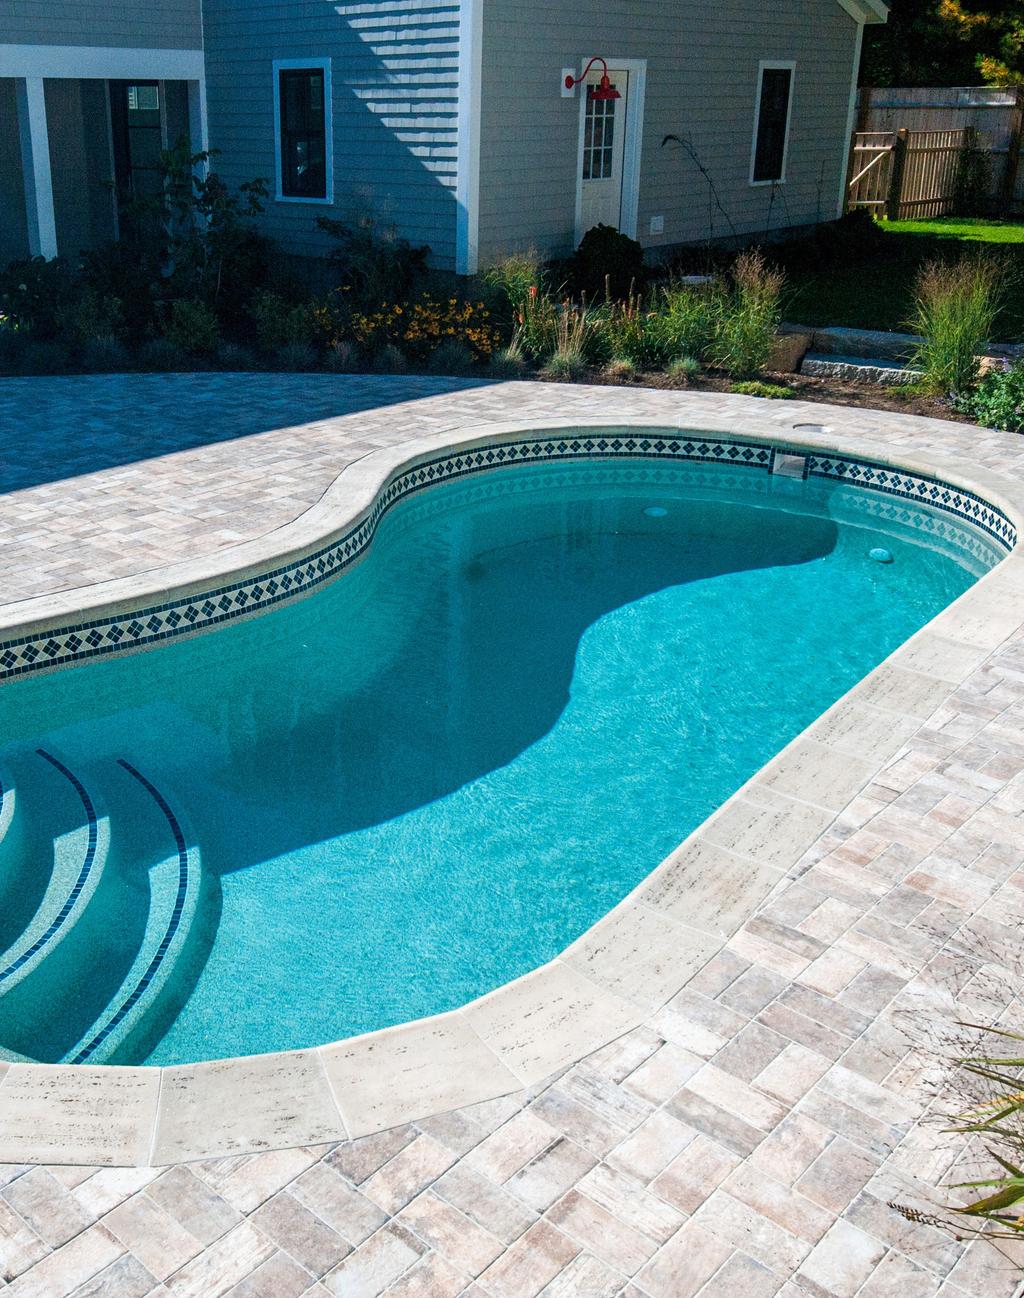 Myth #4: Fiberglass pools are more expensive. THIS IS A TRICK QUESTION. If you compare the initial purchase of a fiberglass pool to that of a vinyl pool, then yes, a fiberglass pool is more expensive.